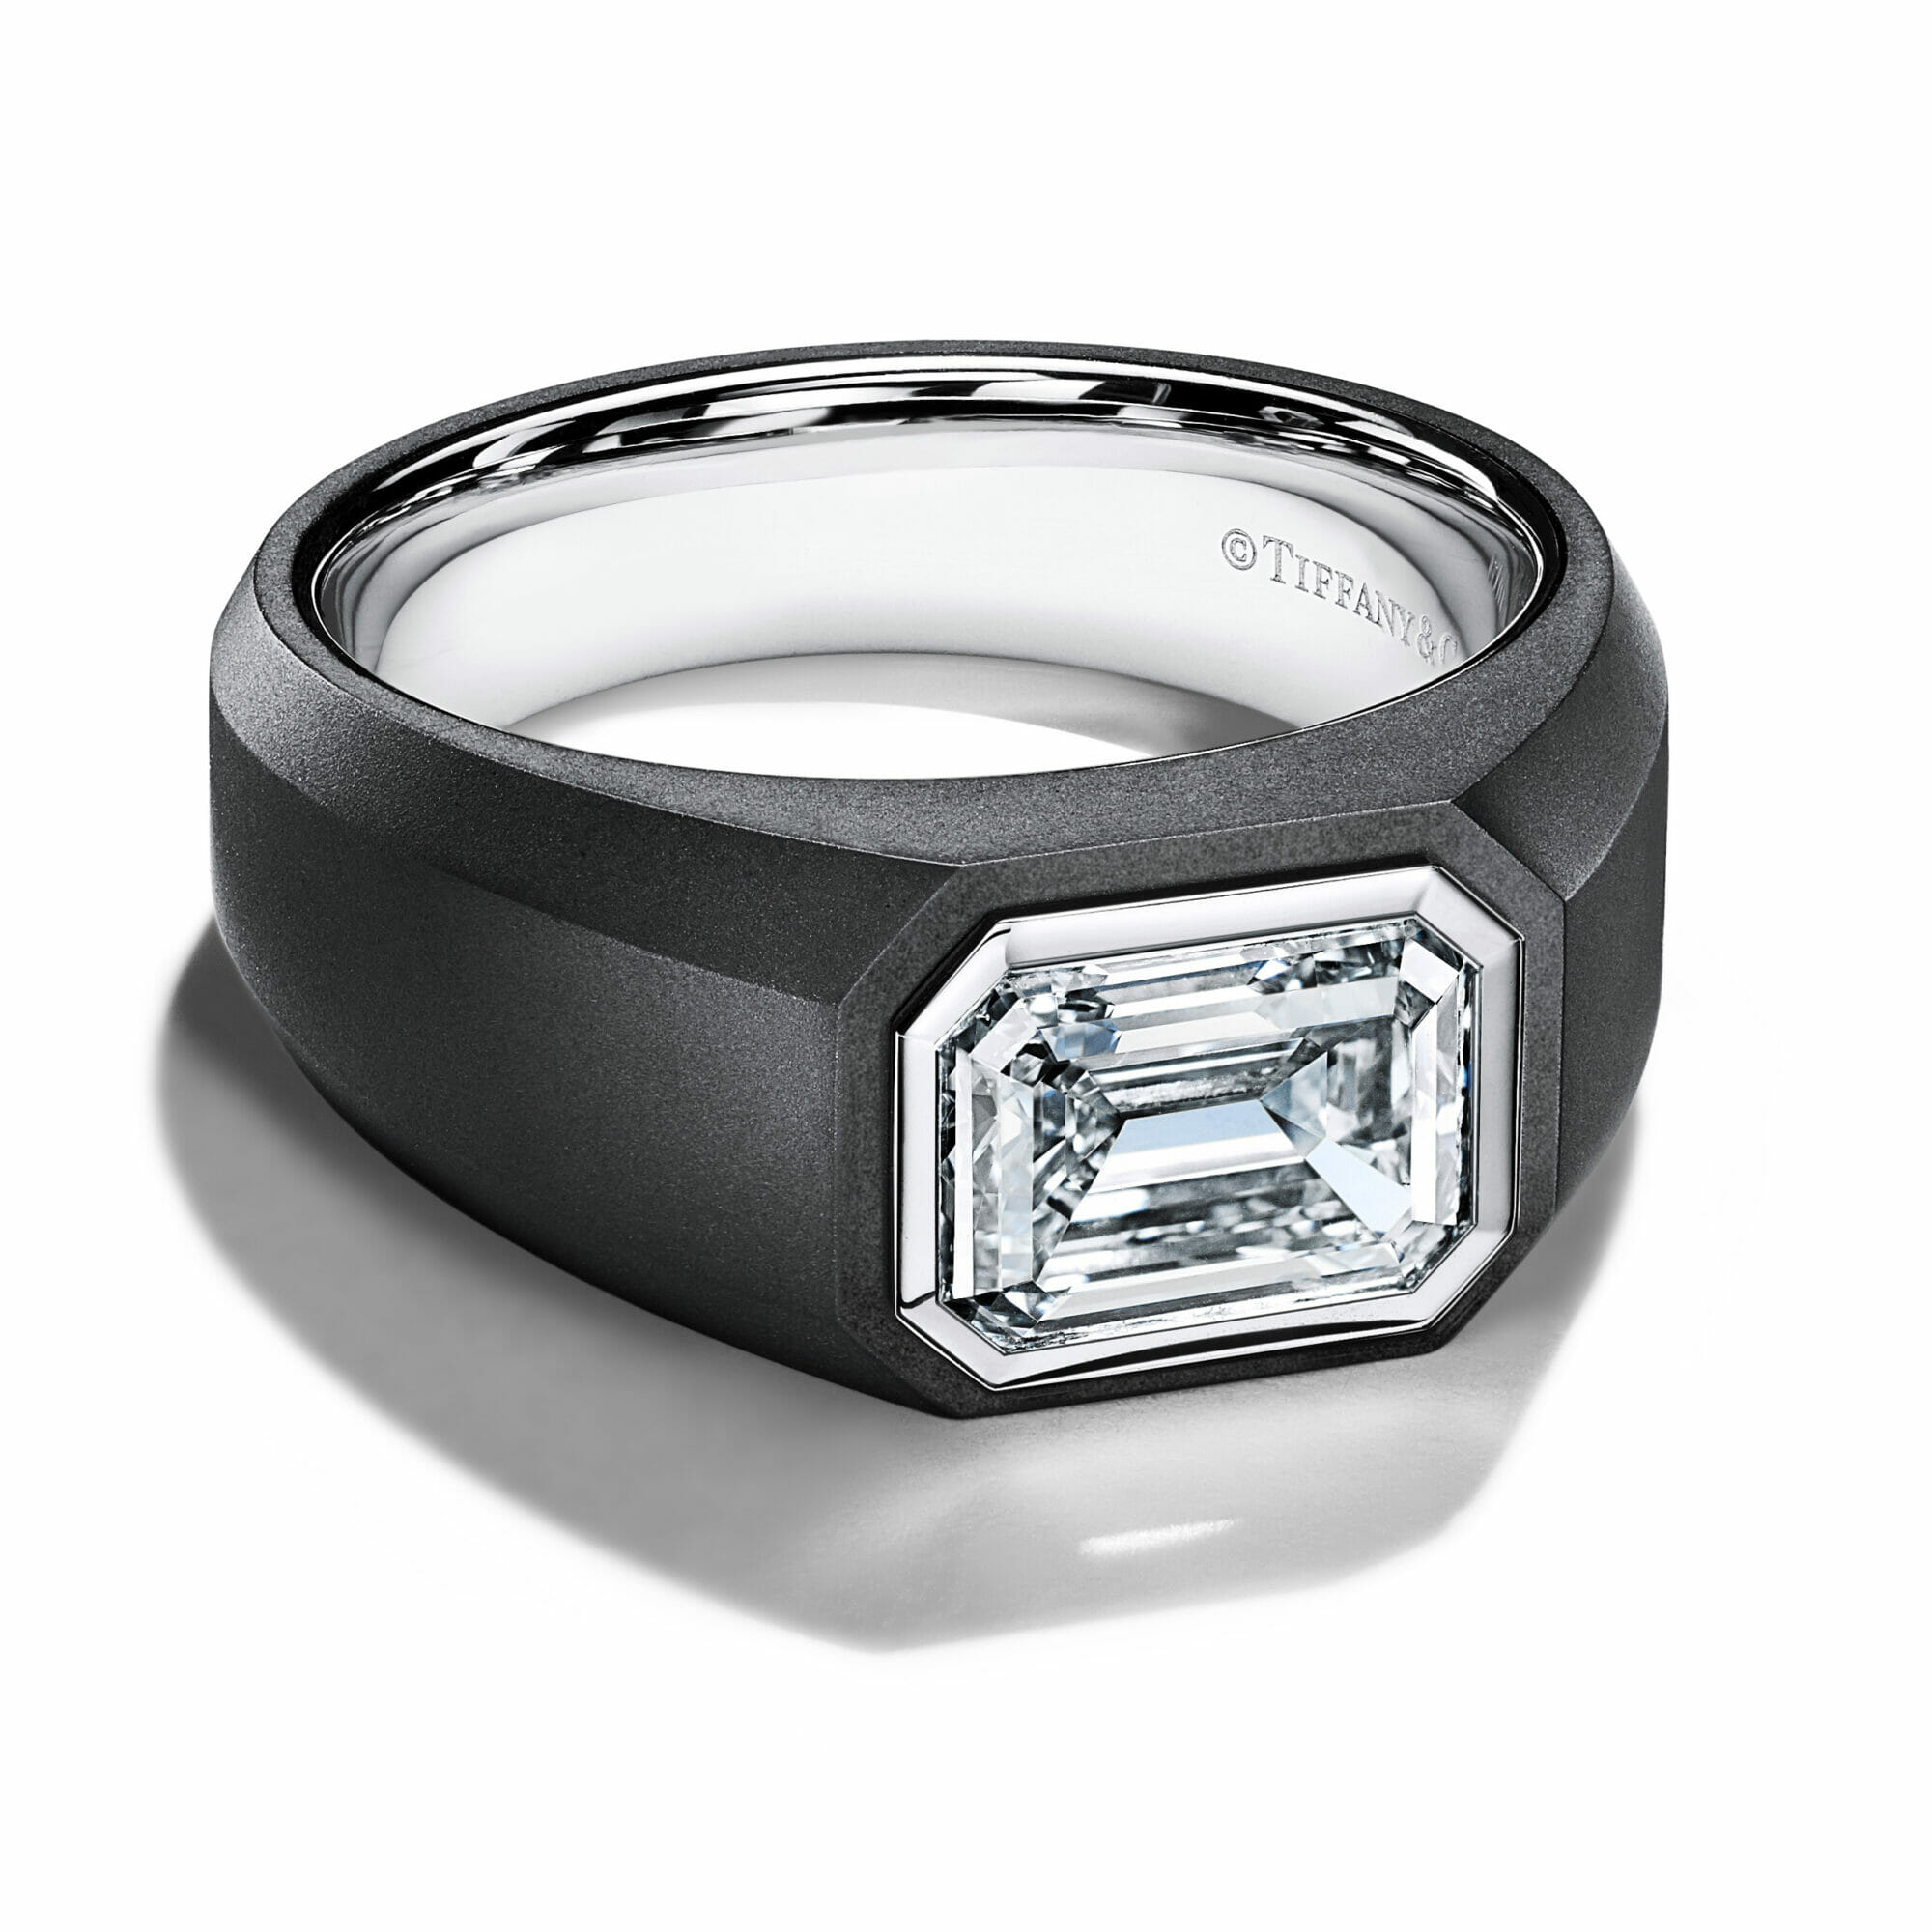 Buy KISNA Real Diamond Jewellery 14KT White Gold SI Diamond Ring for Men |  Cushion S15 at Amazon.in